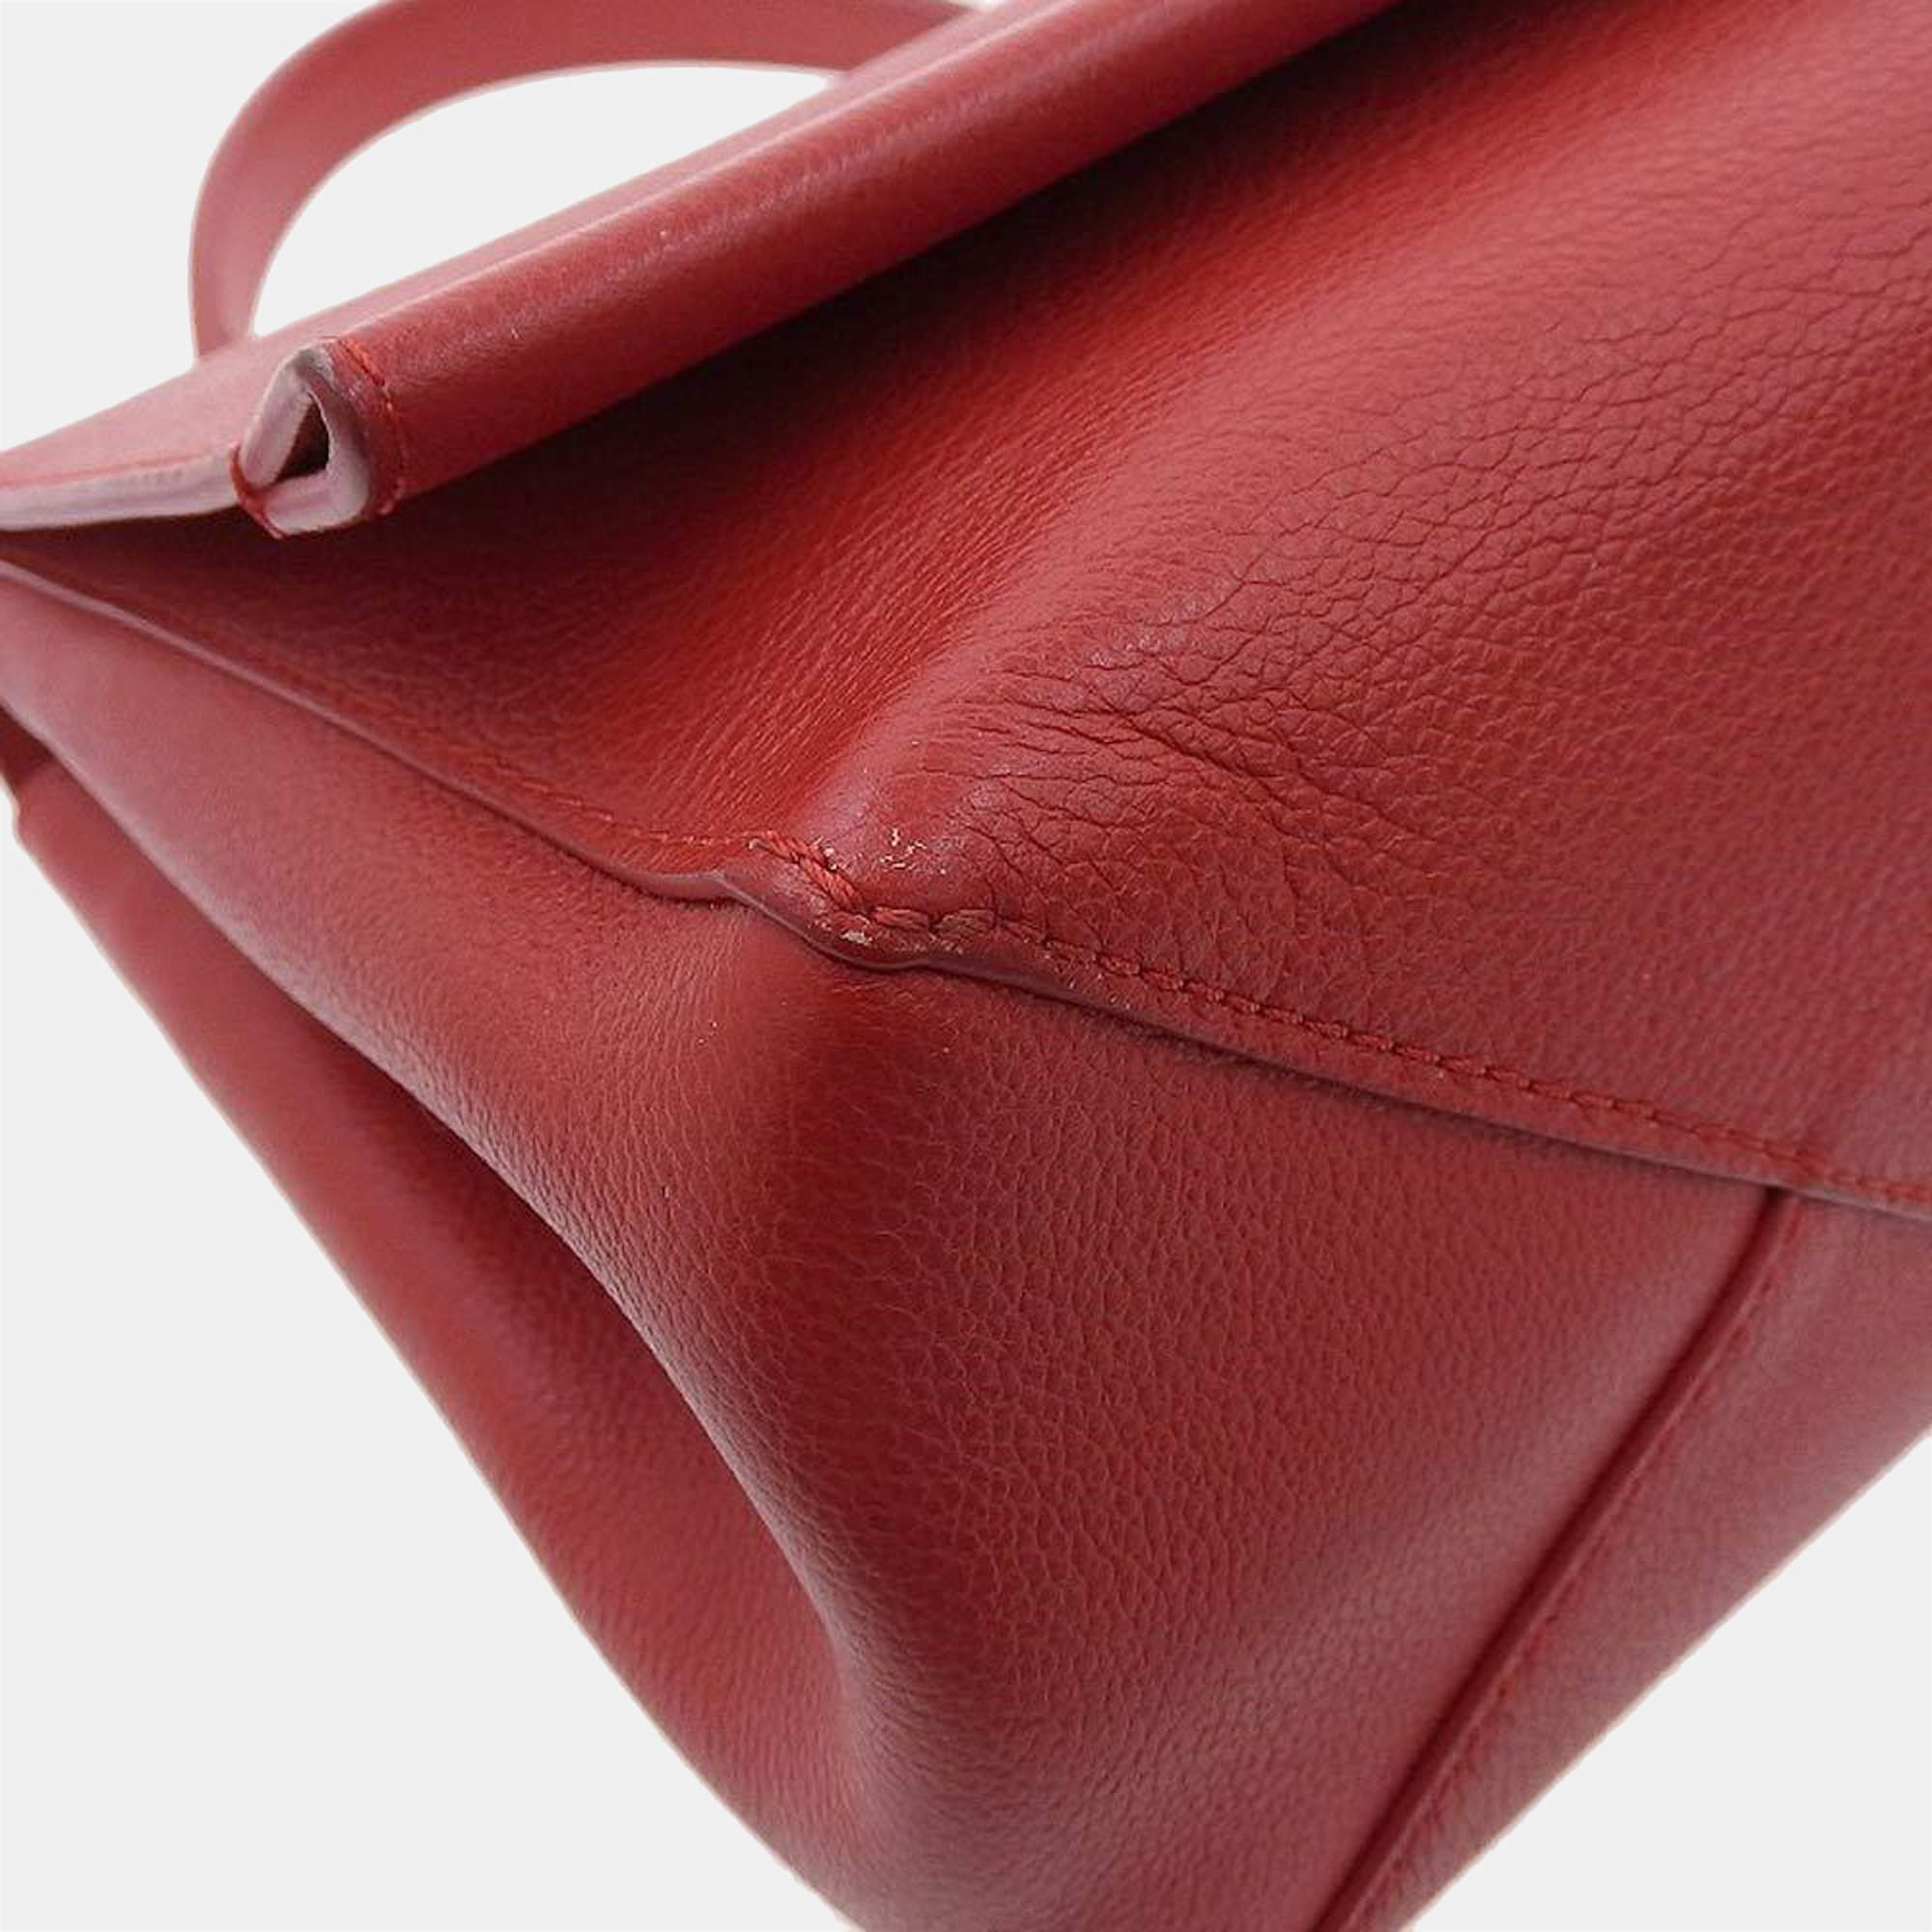 Louis Vuitton Ruby Red Leather Lockme II Top Handle Bag Louis